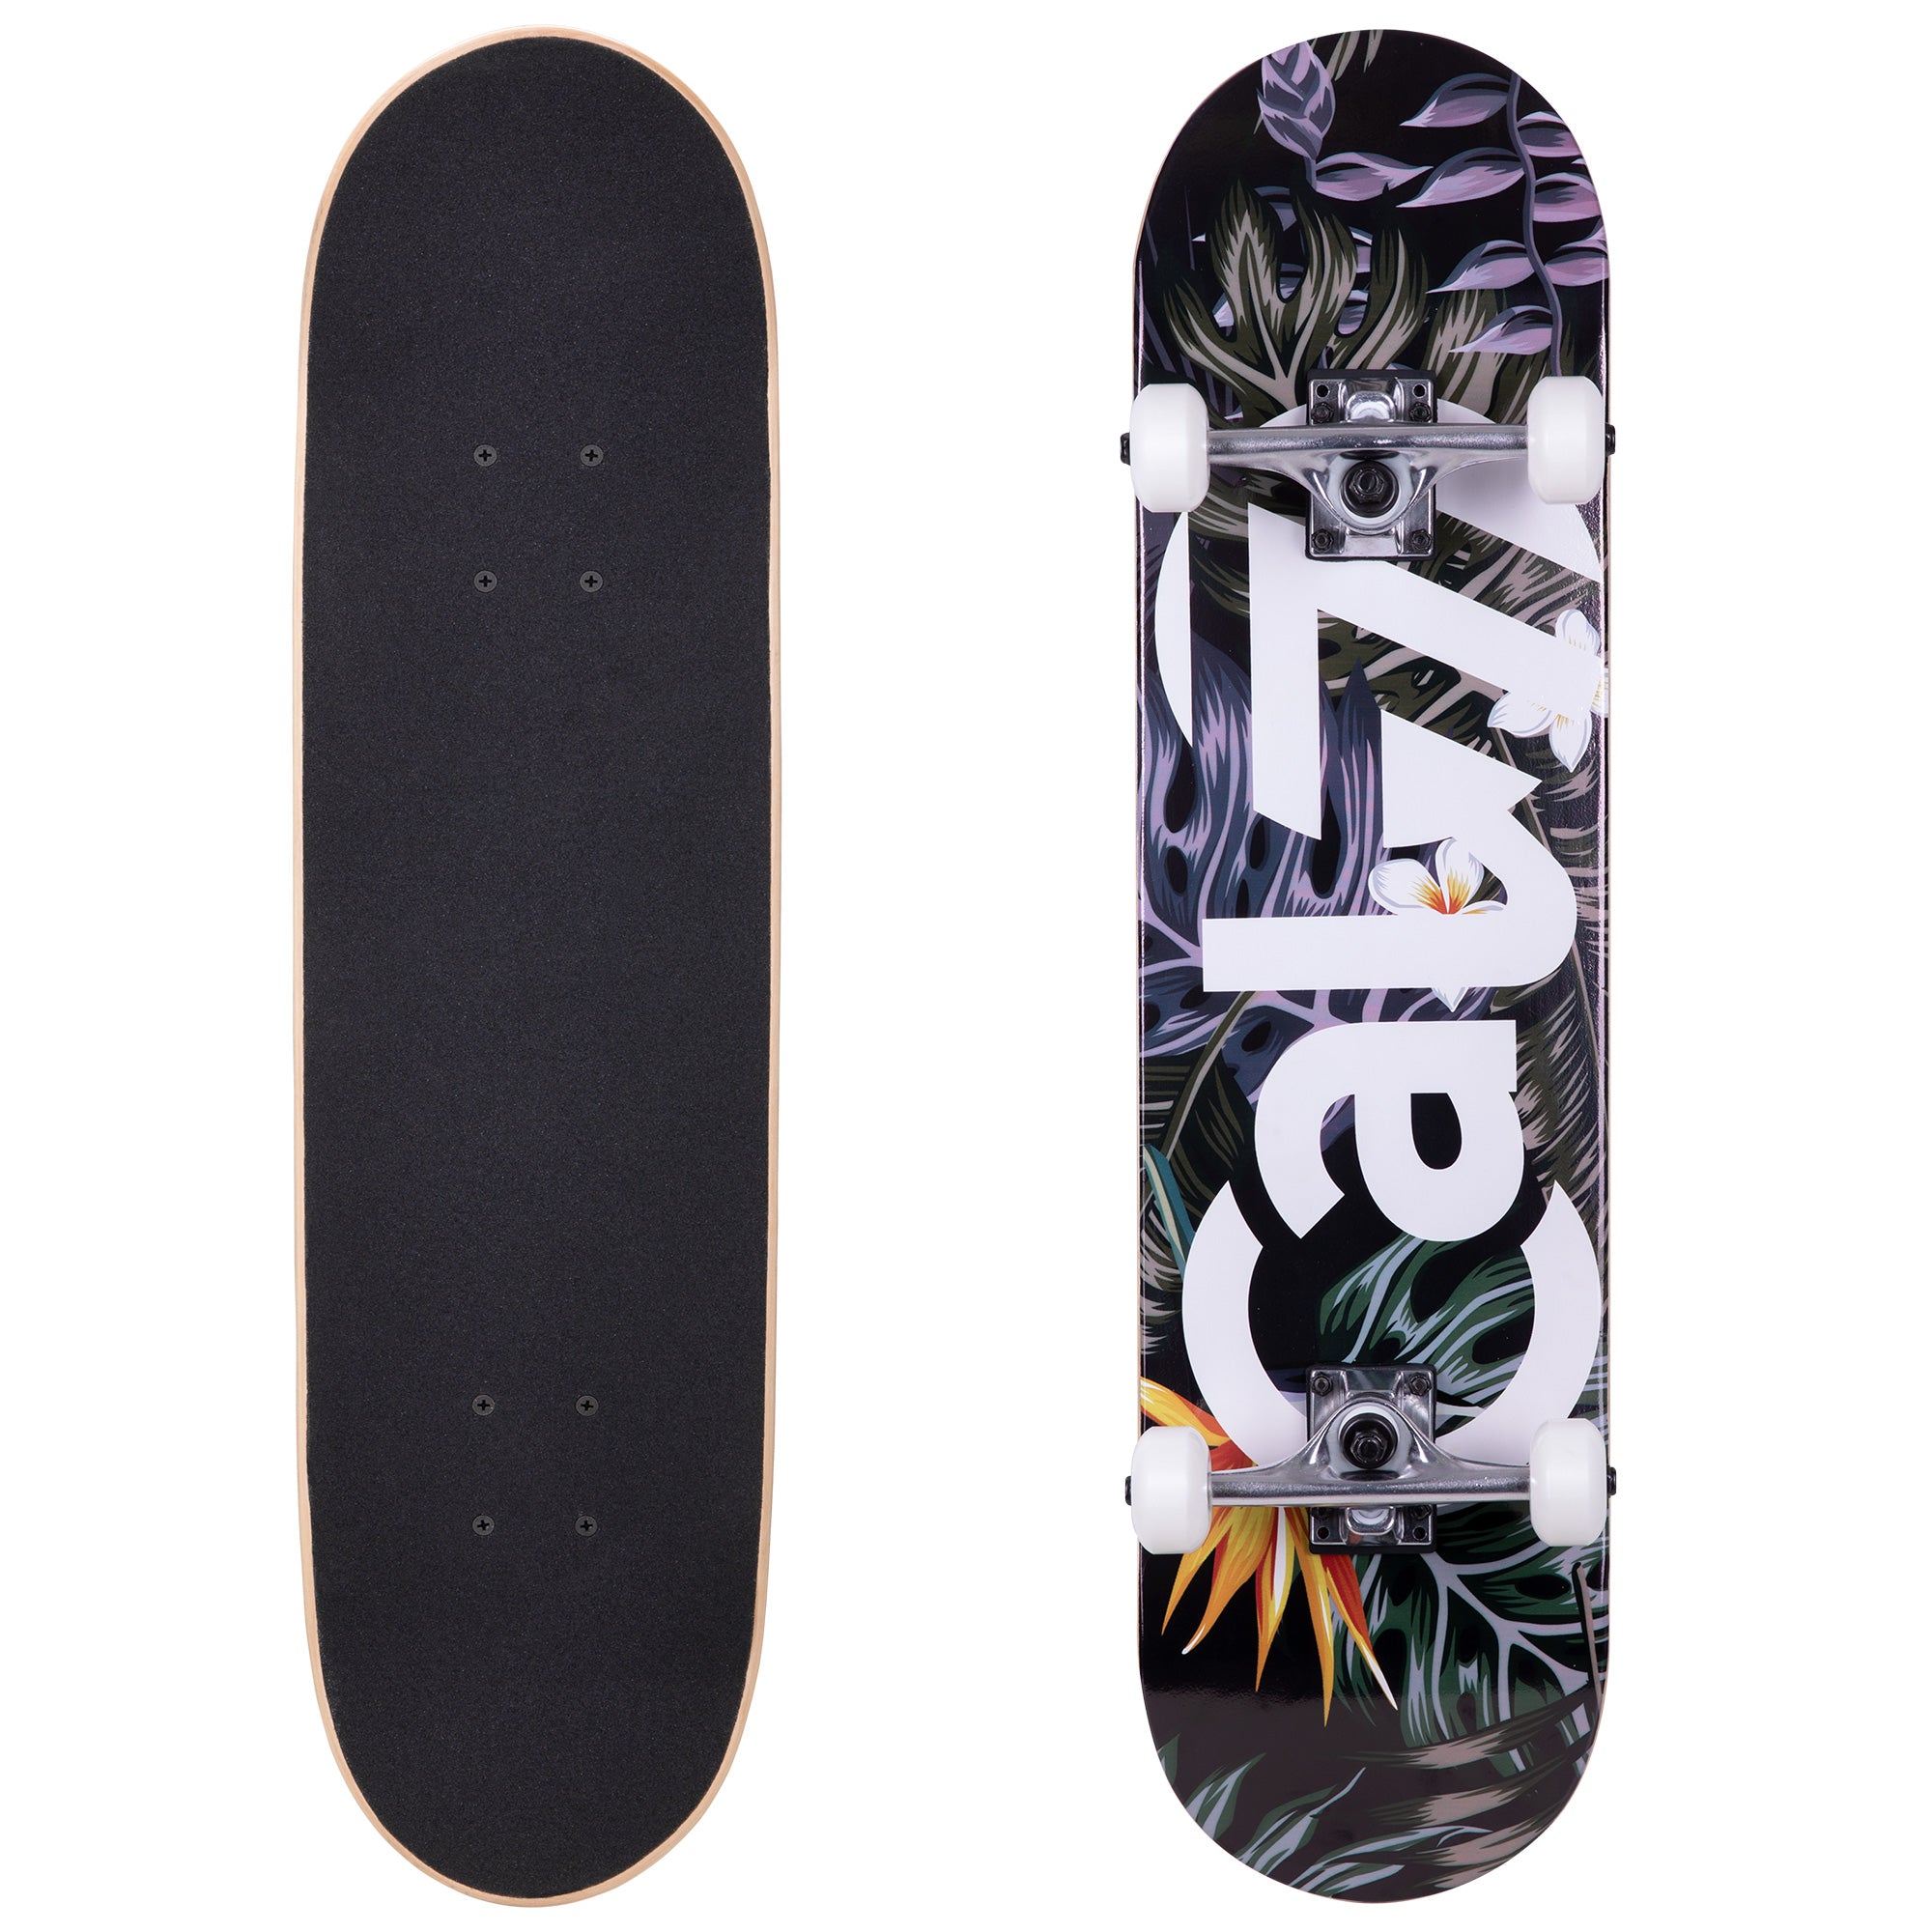 Cal Complete Inch Skateboard